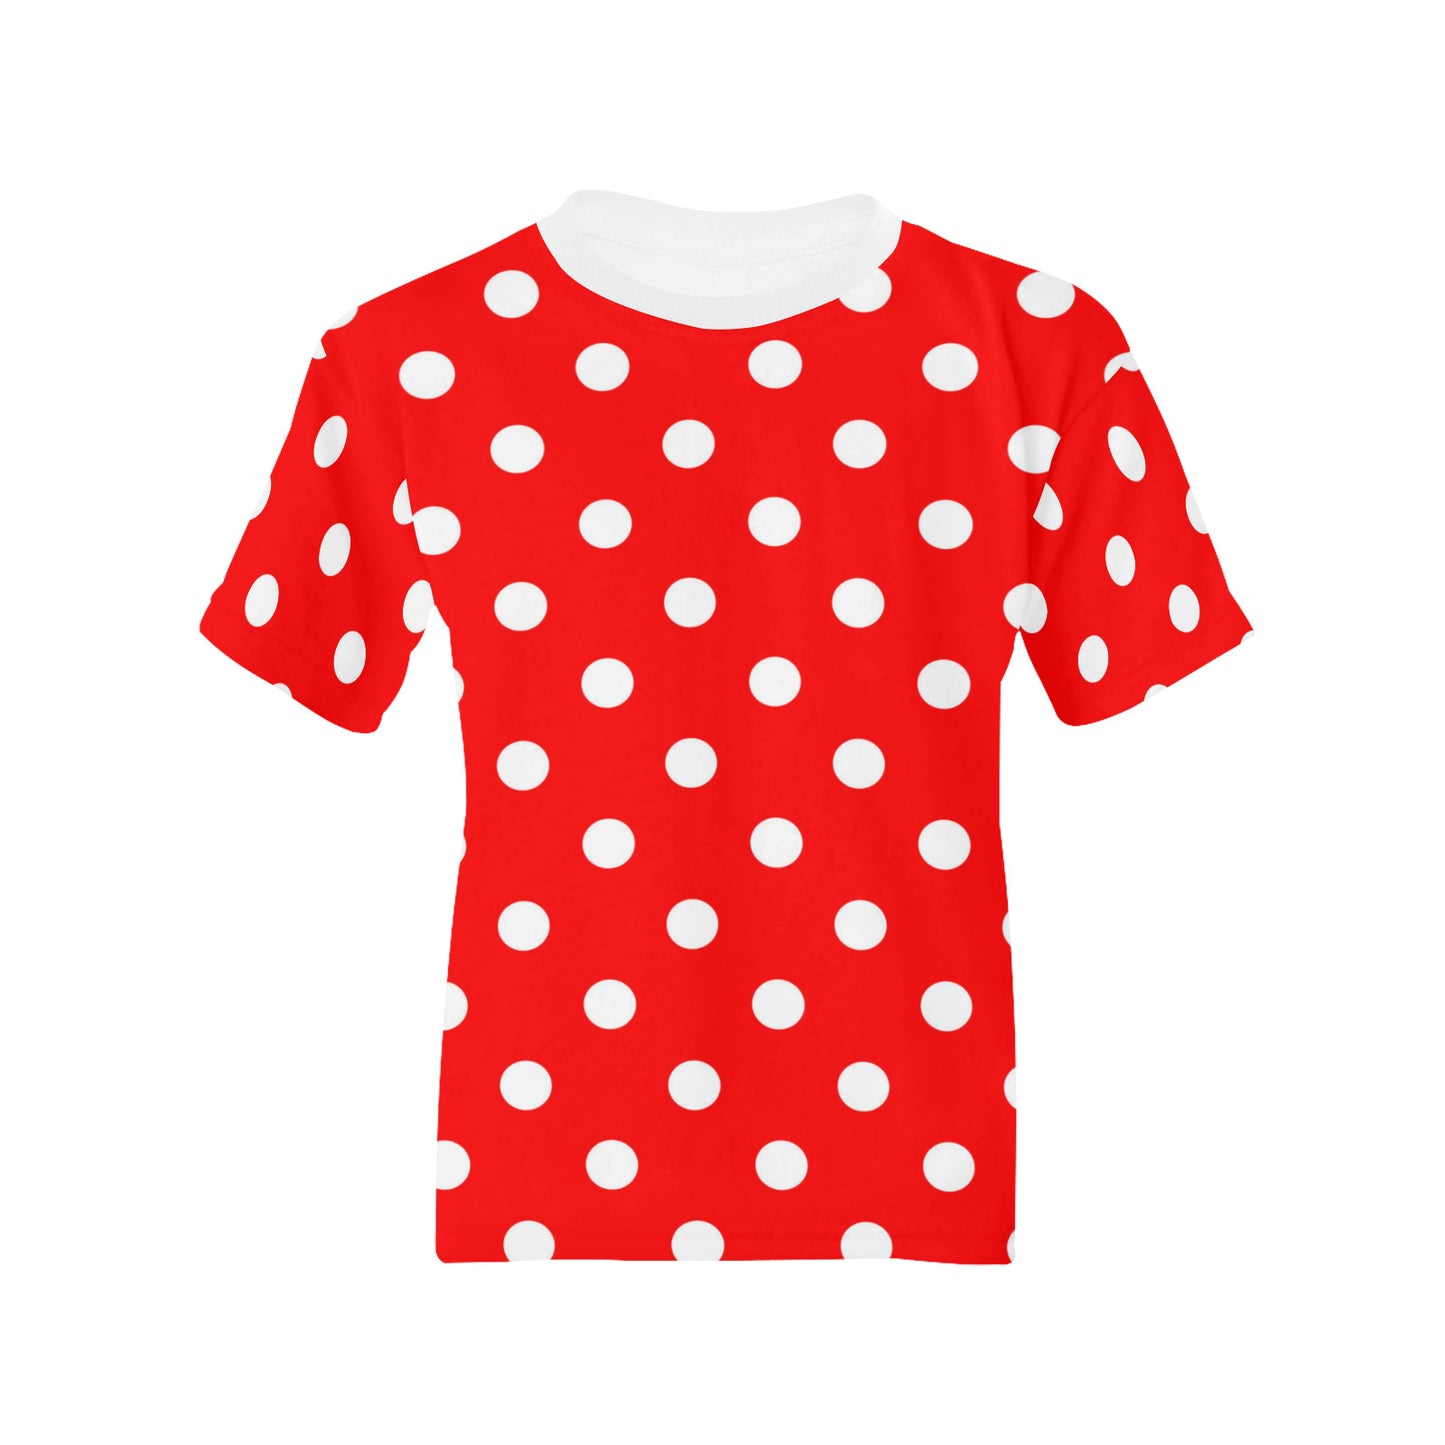 Red With White Polka Dots Kids' T-shirt